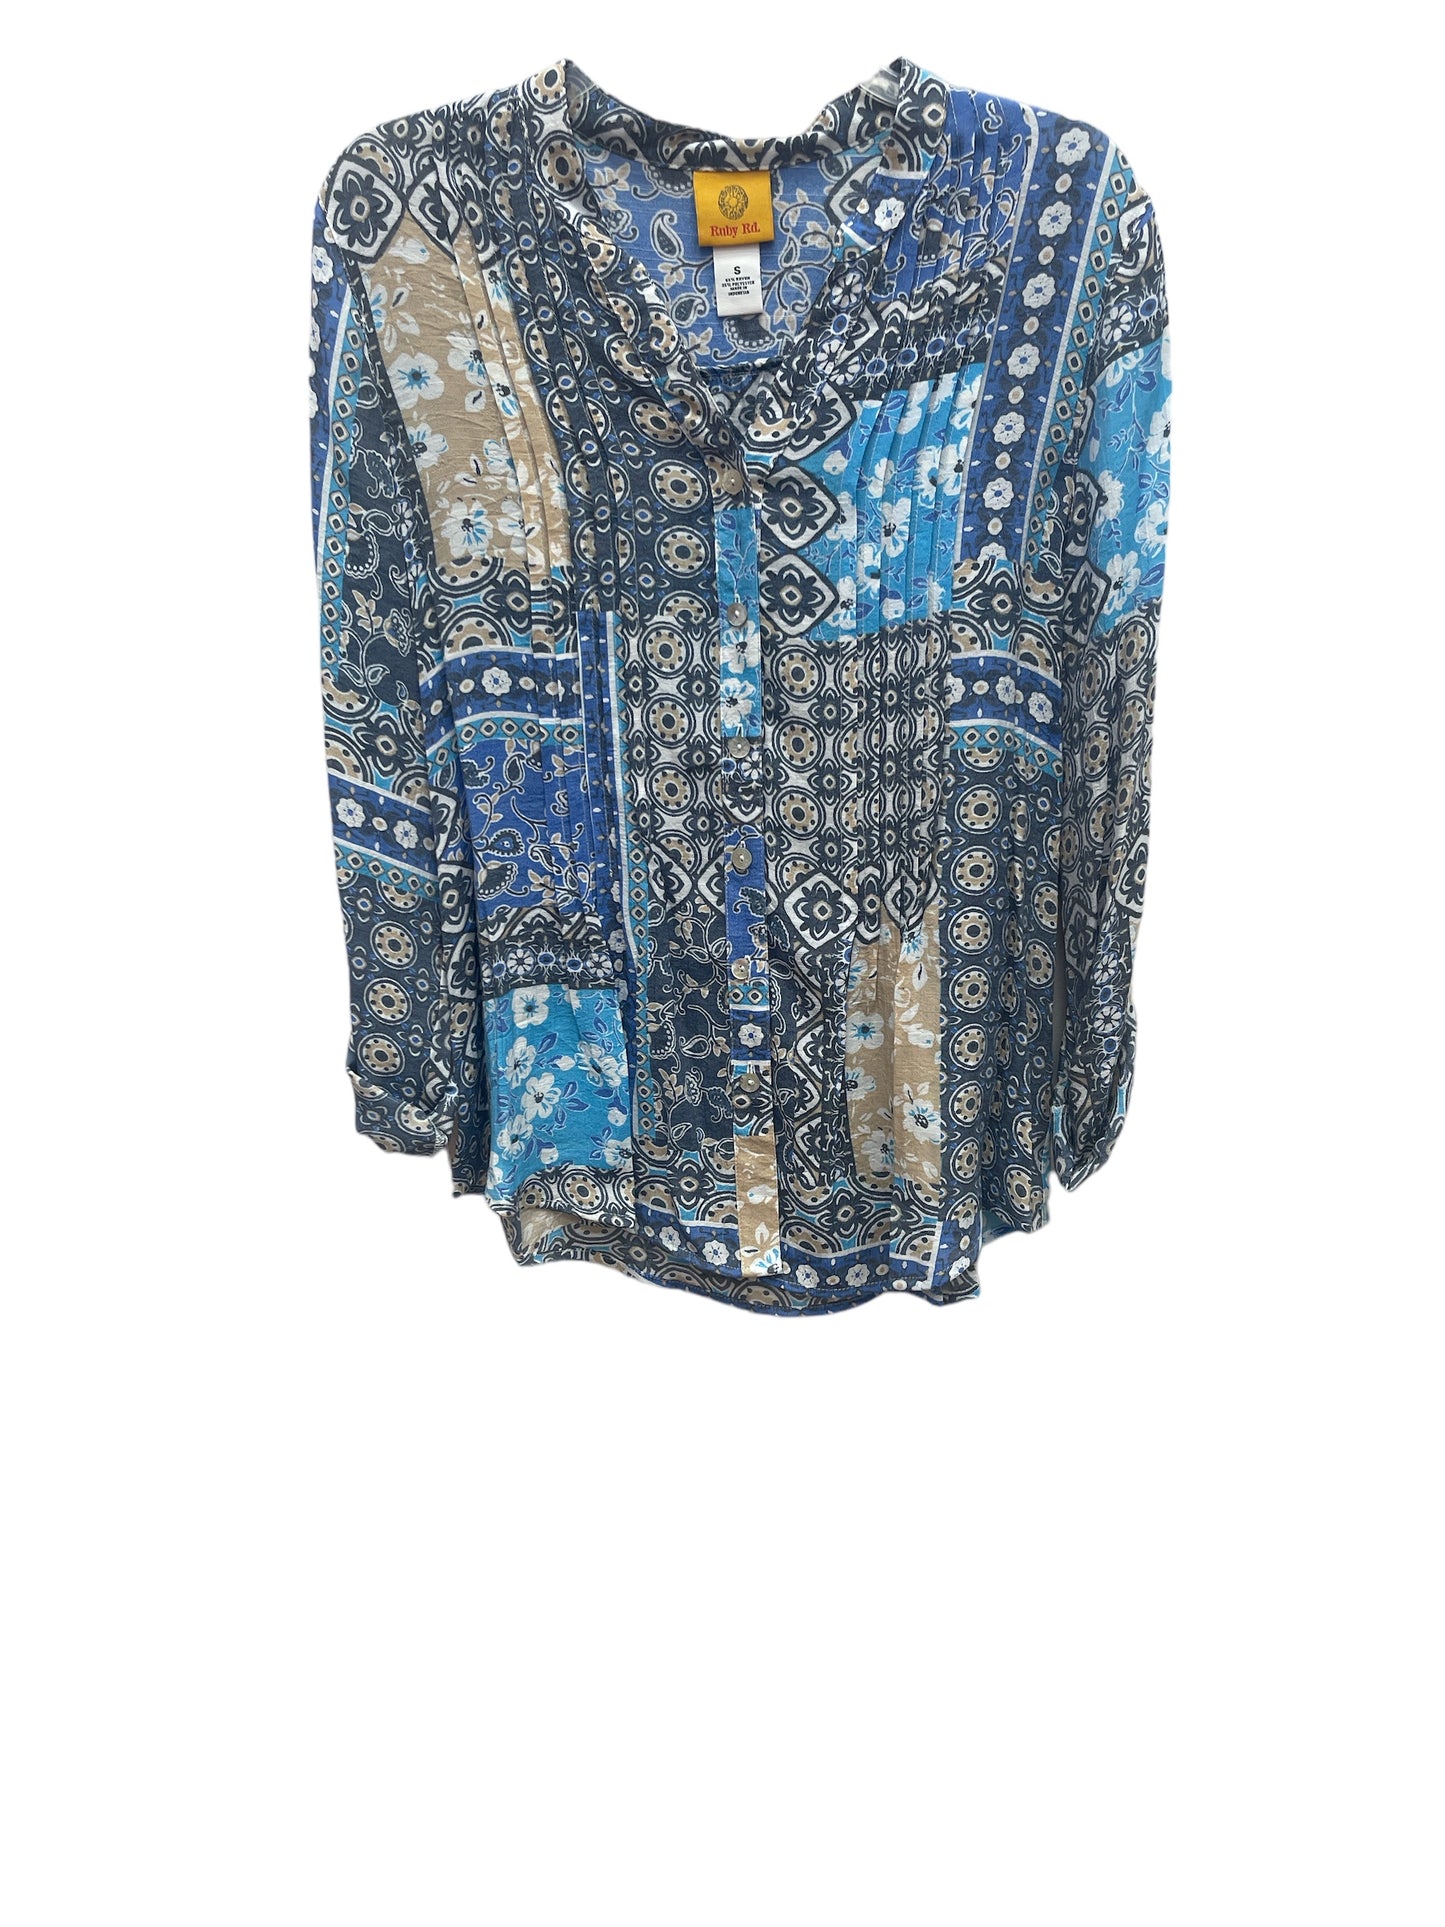 Ruby RD Women's Woven Button Front Patchwork Print Top